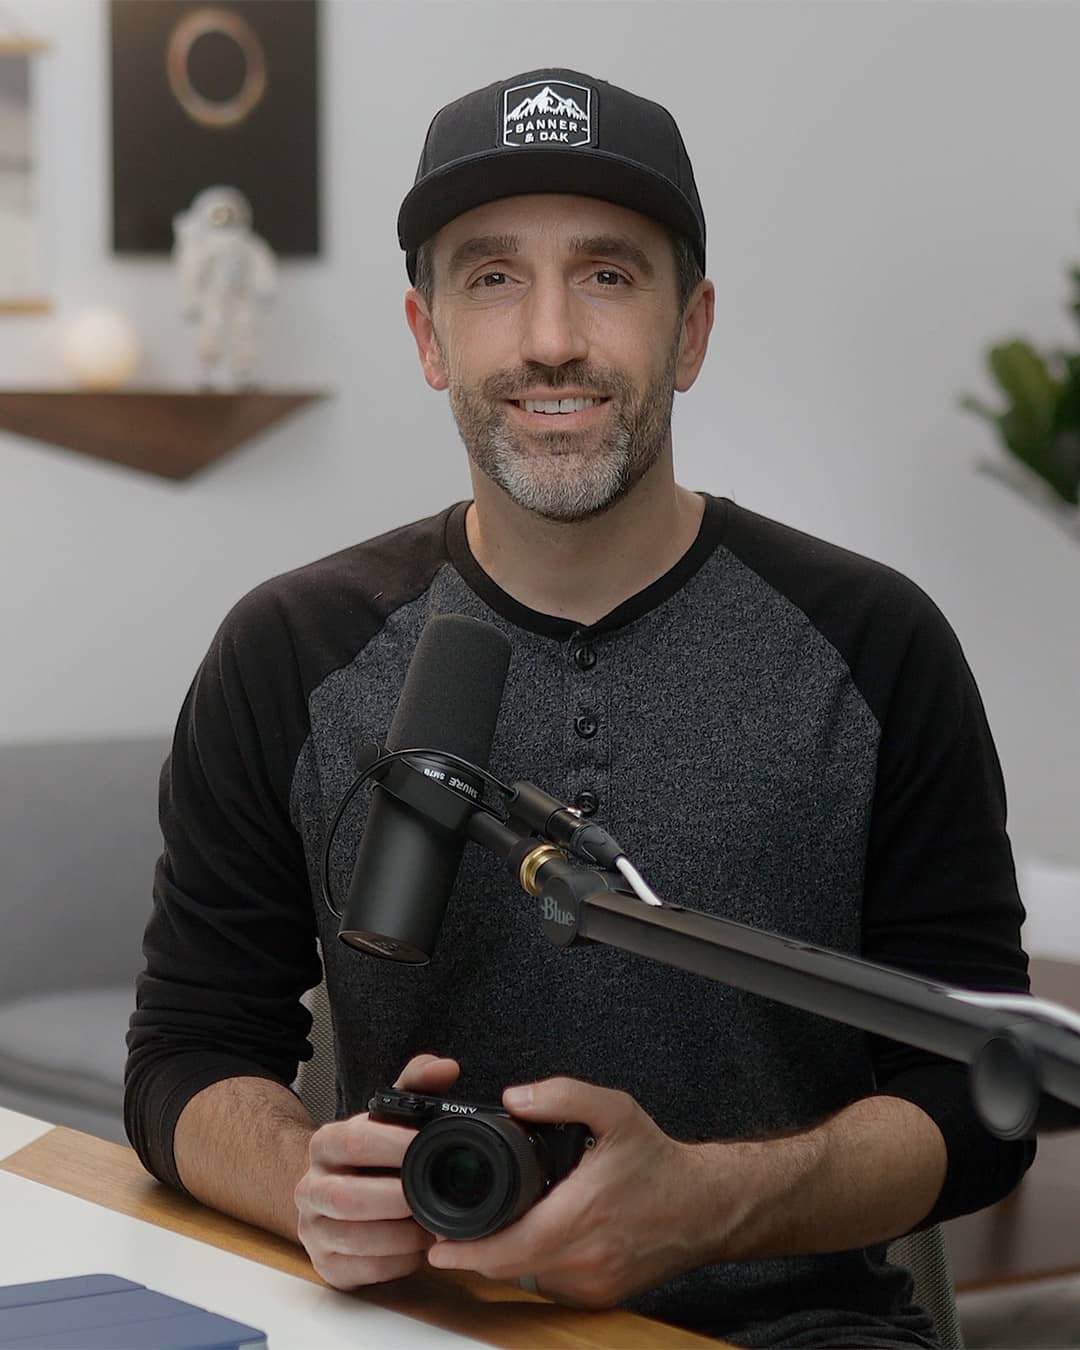 My Top 5 Tips for Beginner Content Creators Using the Sony A6400